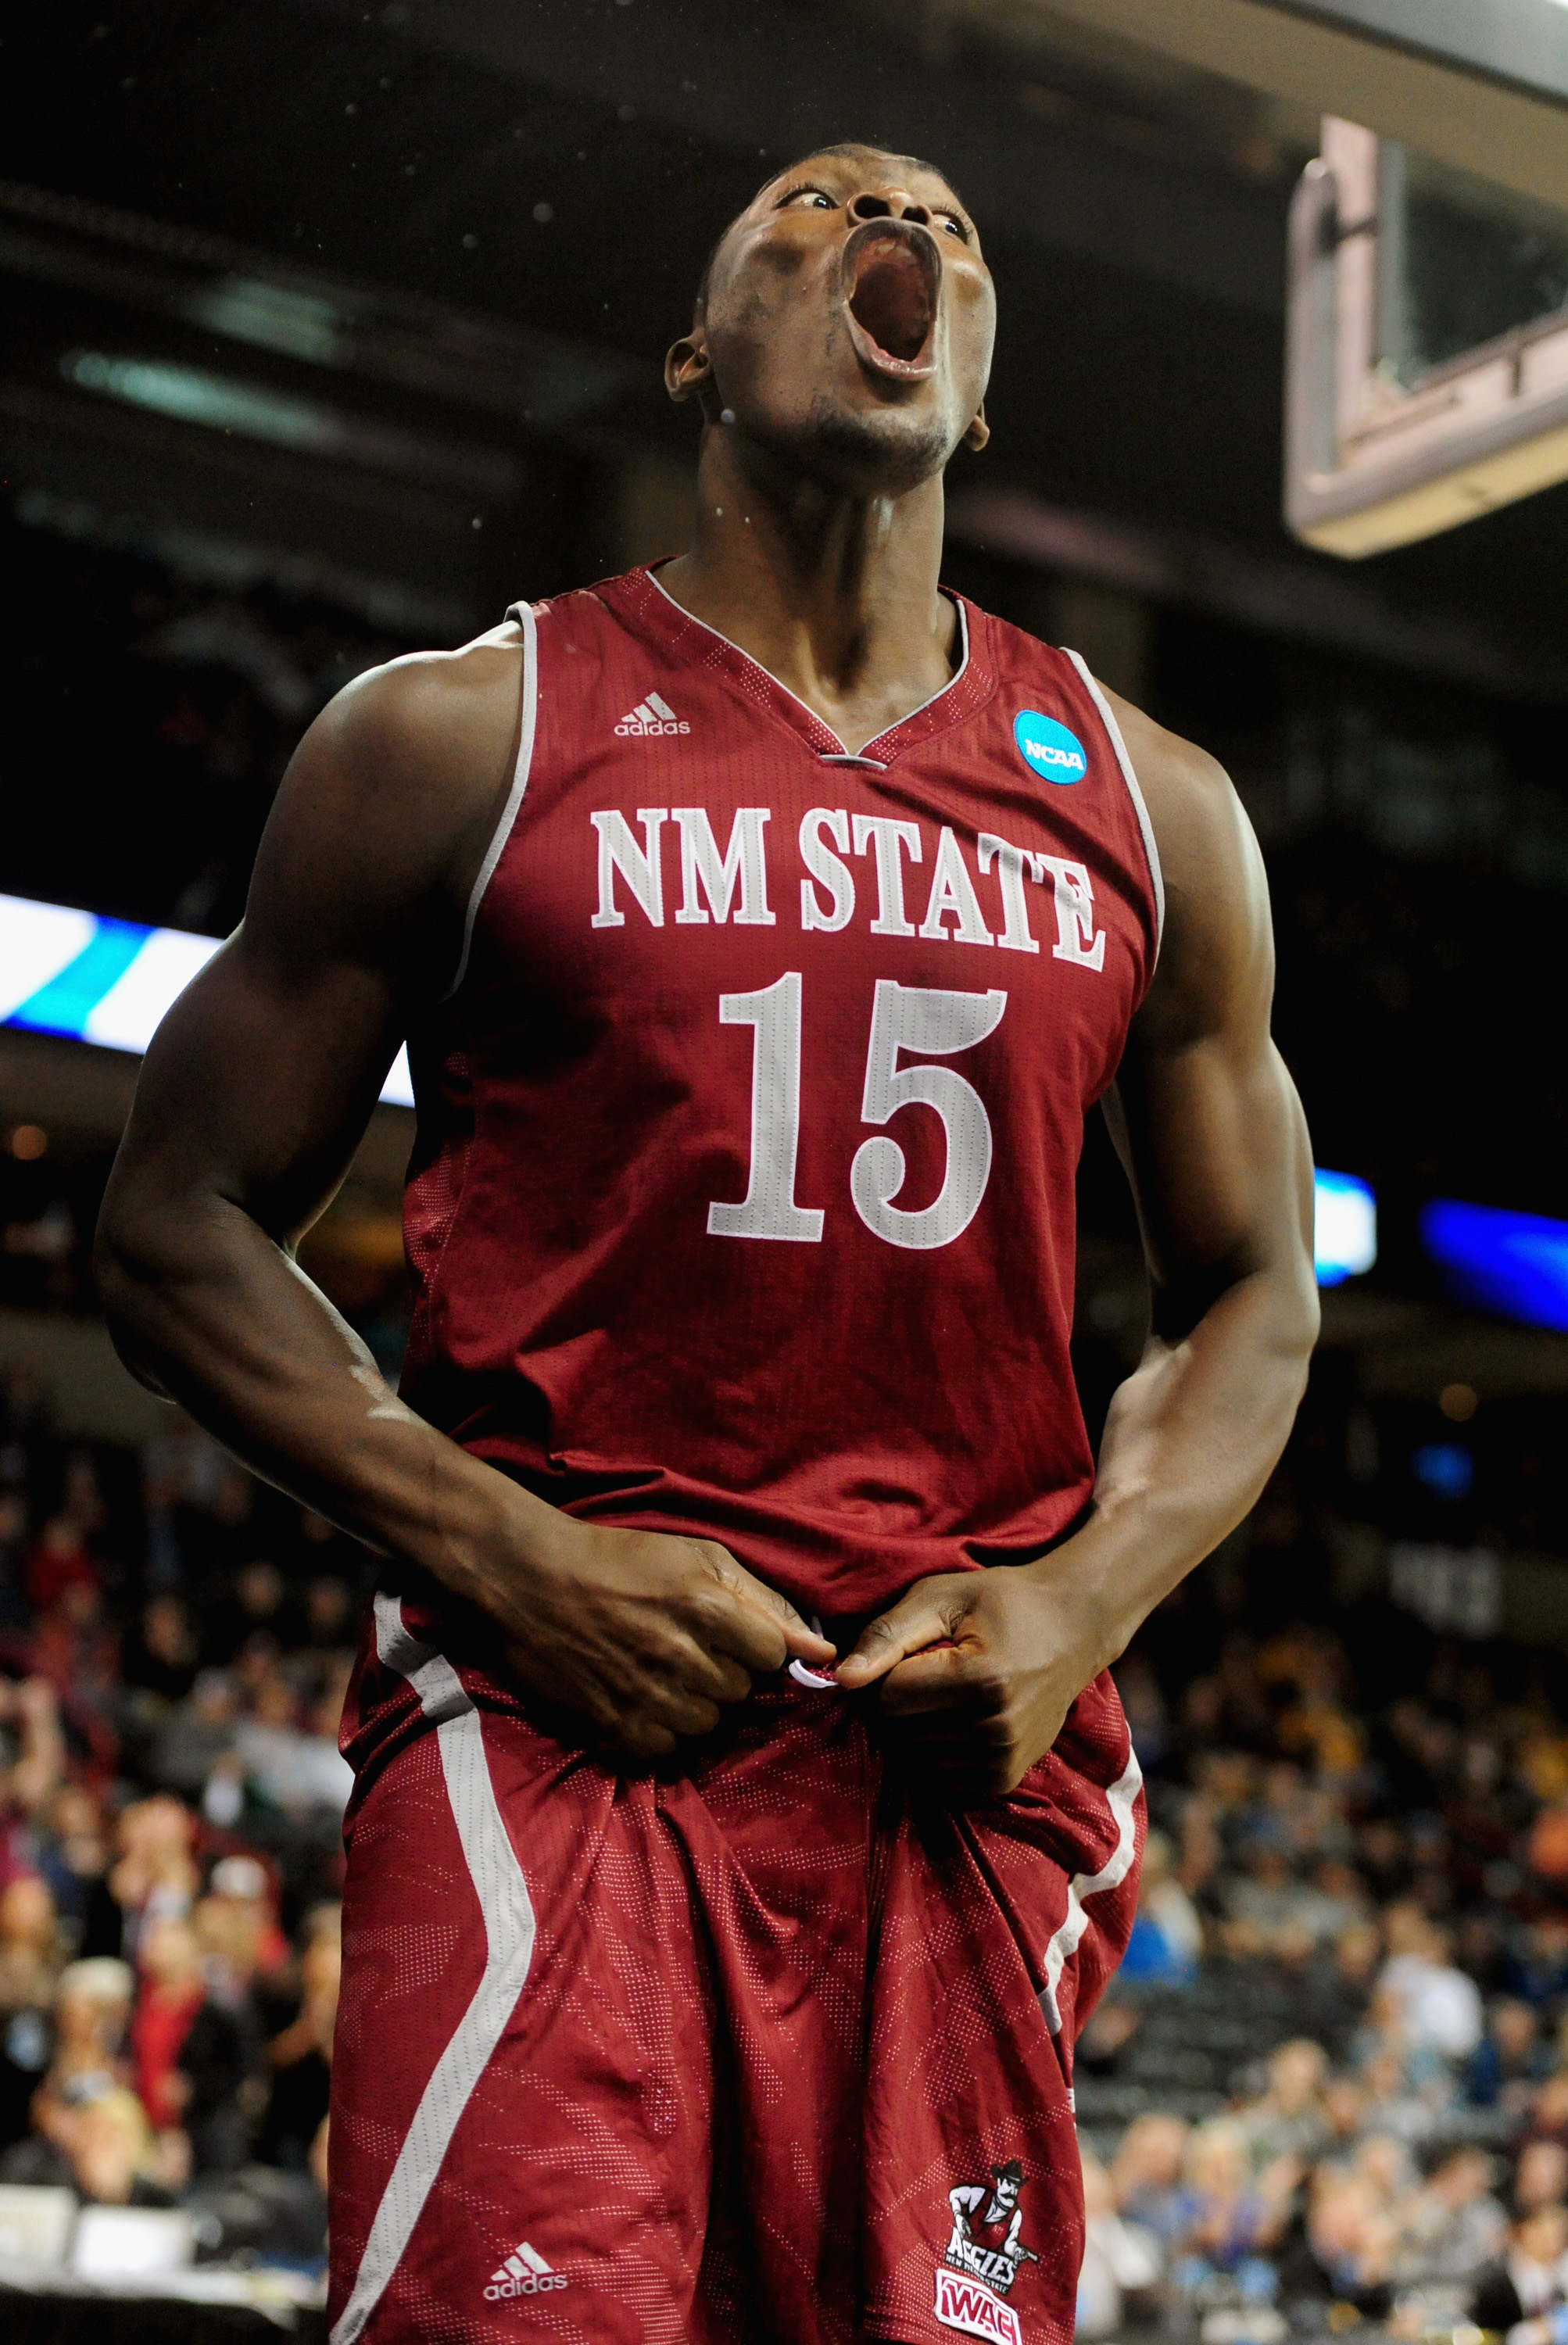 Tshilidzi Nephawe #15 of the New Mexico State Aggies.  (Photo by Steve Dykes/Getty Images)